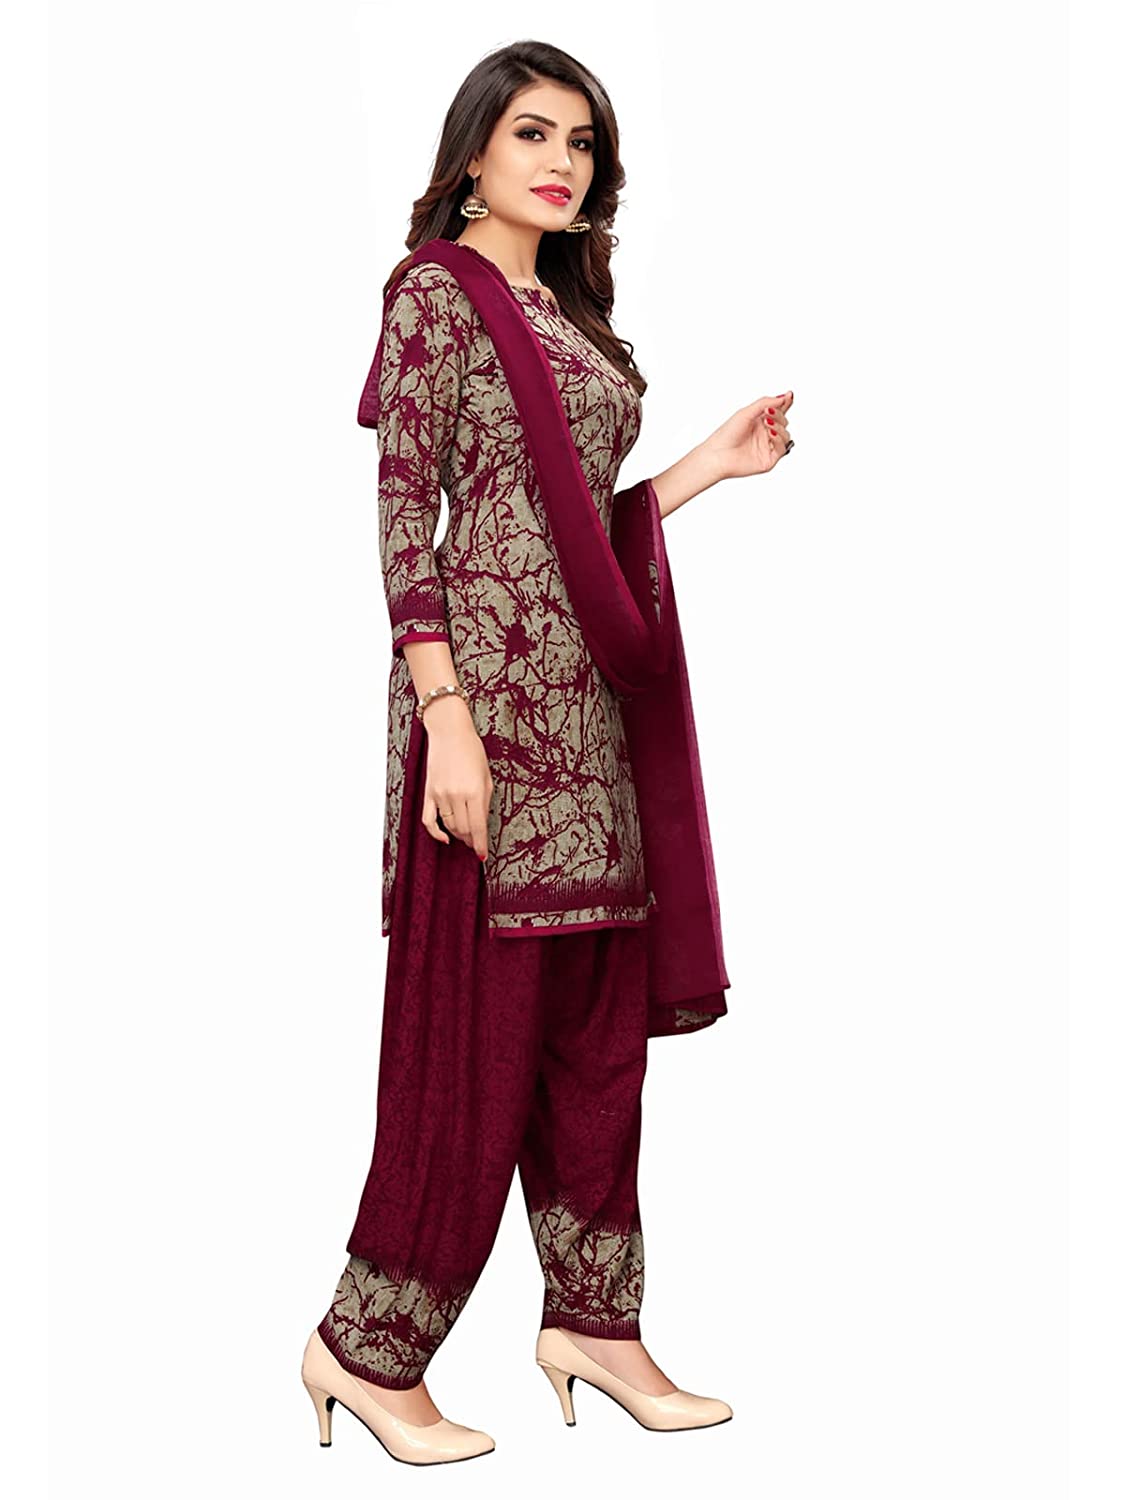 SIRIL Women's Crepe Printed Unstitiched Dress Material -  salwar suits in Sri Lanka from Arcade Online Shopping - Just Rs. 4099!